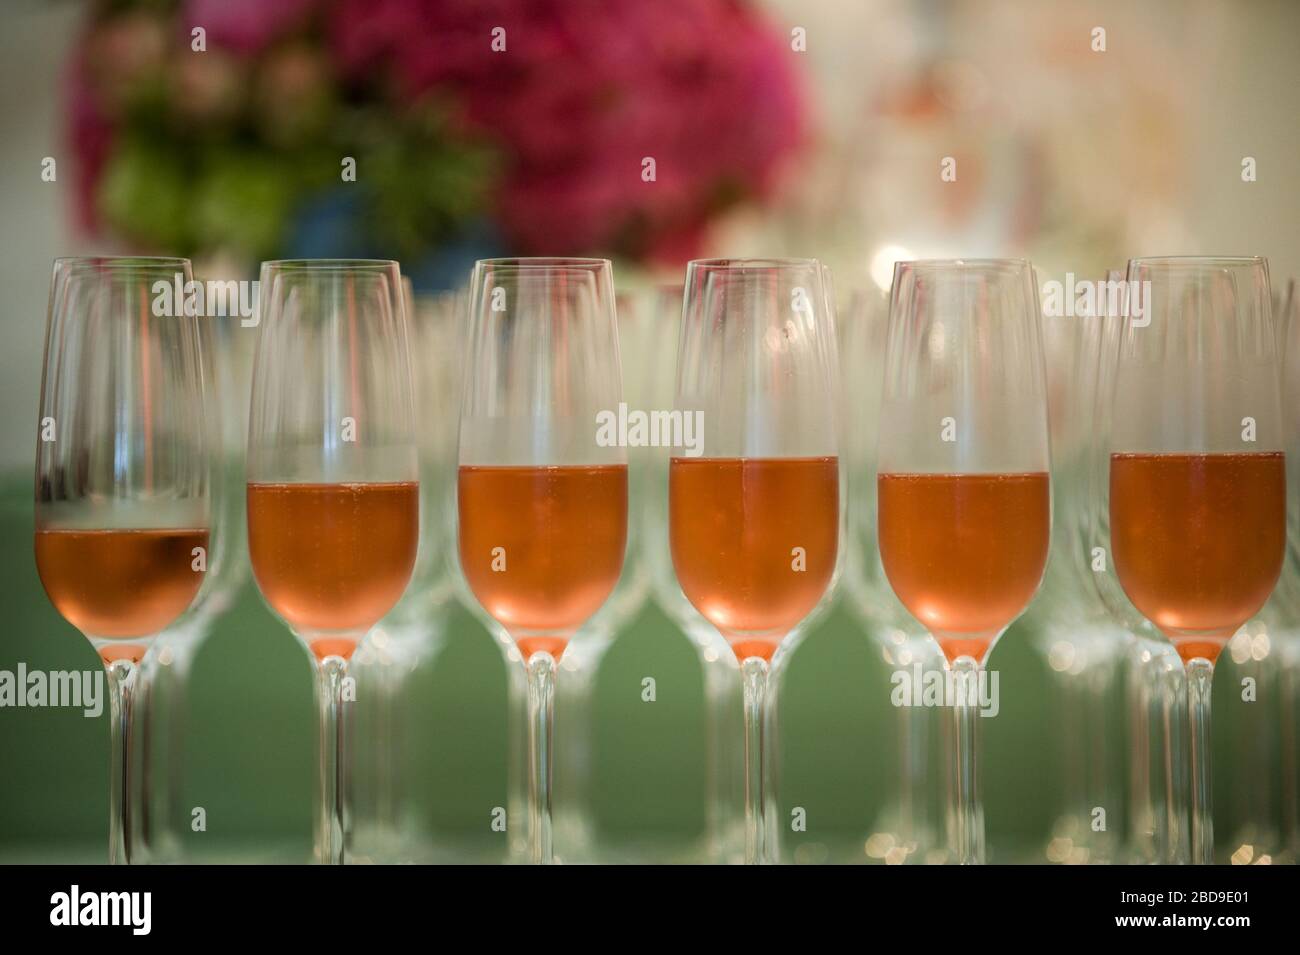 Glasses of champagne at a wedding banquet Stock Photo